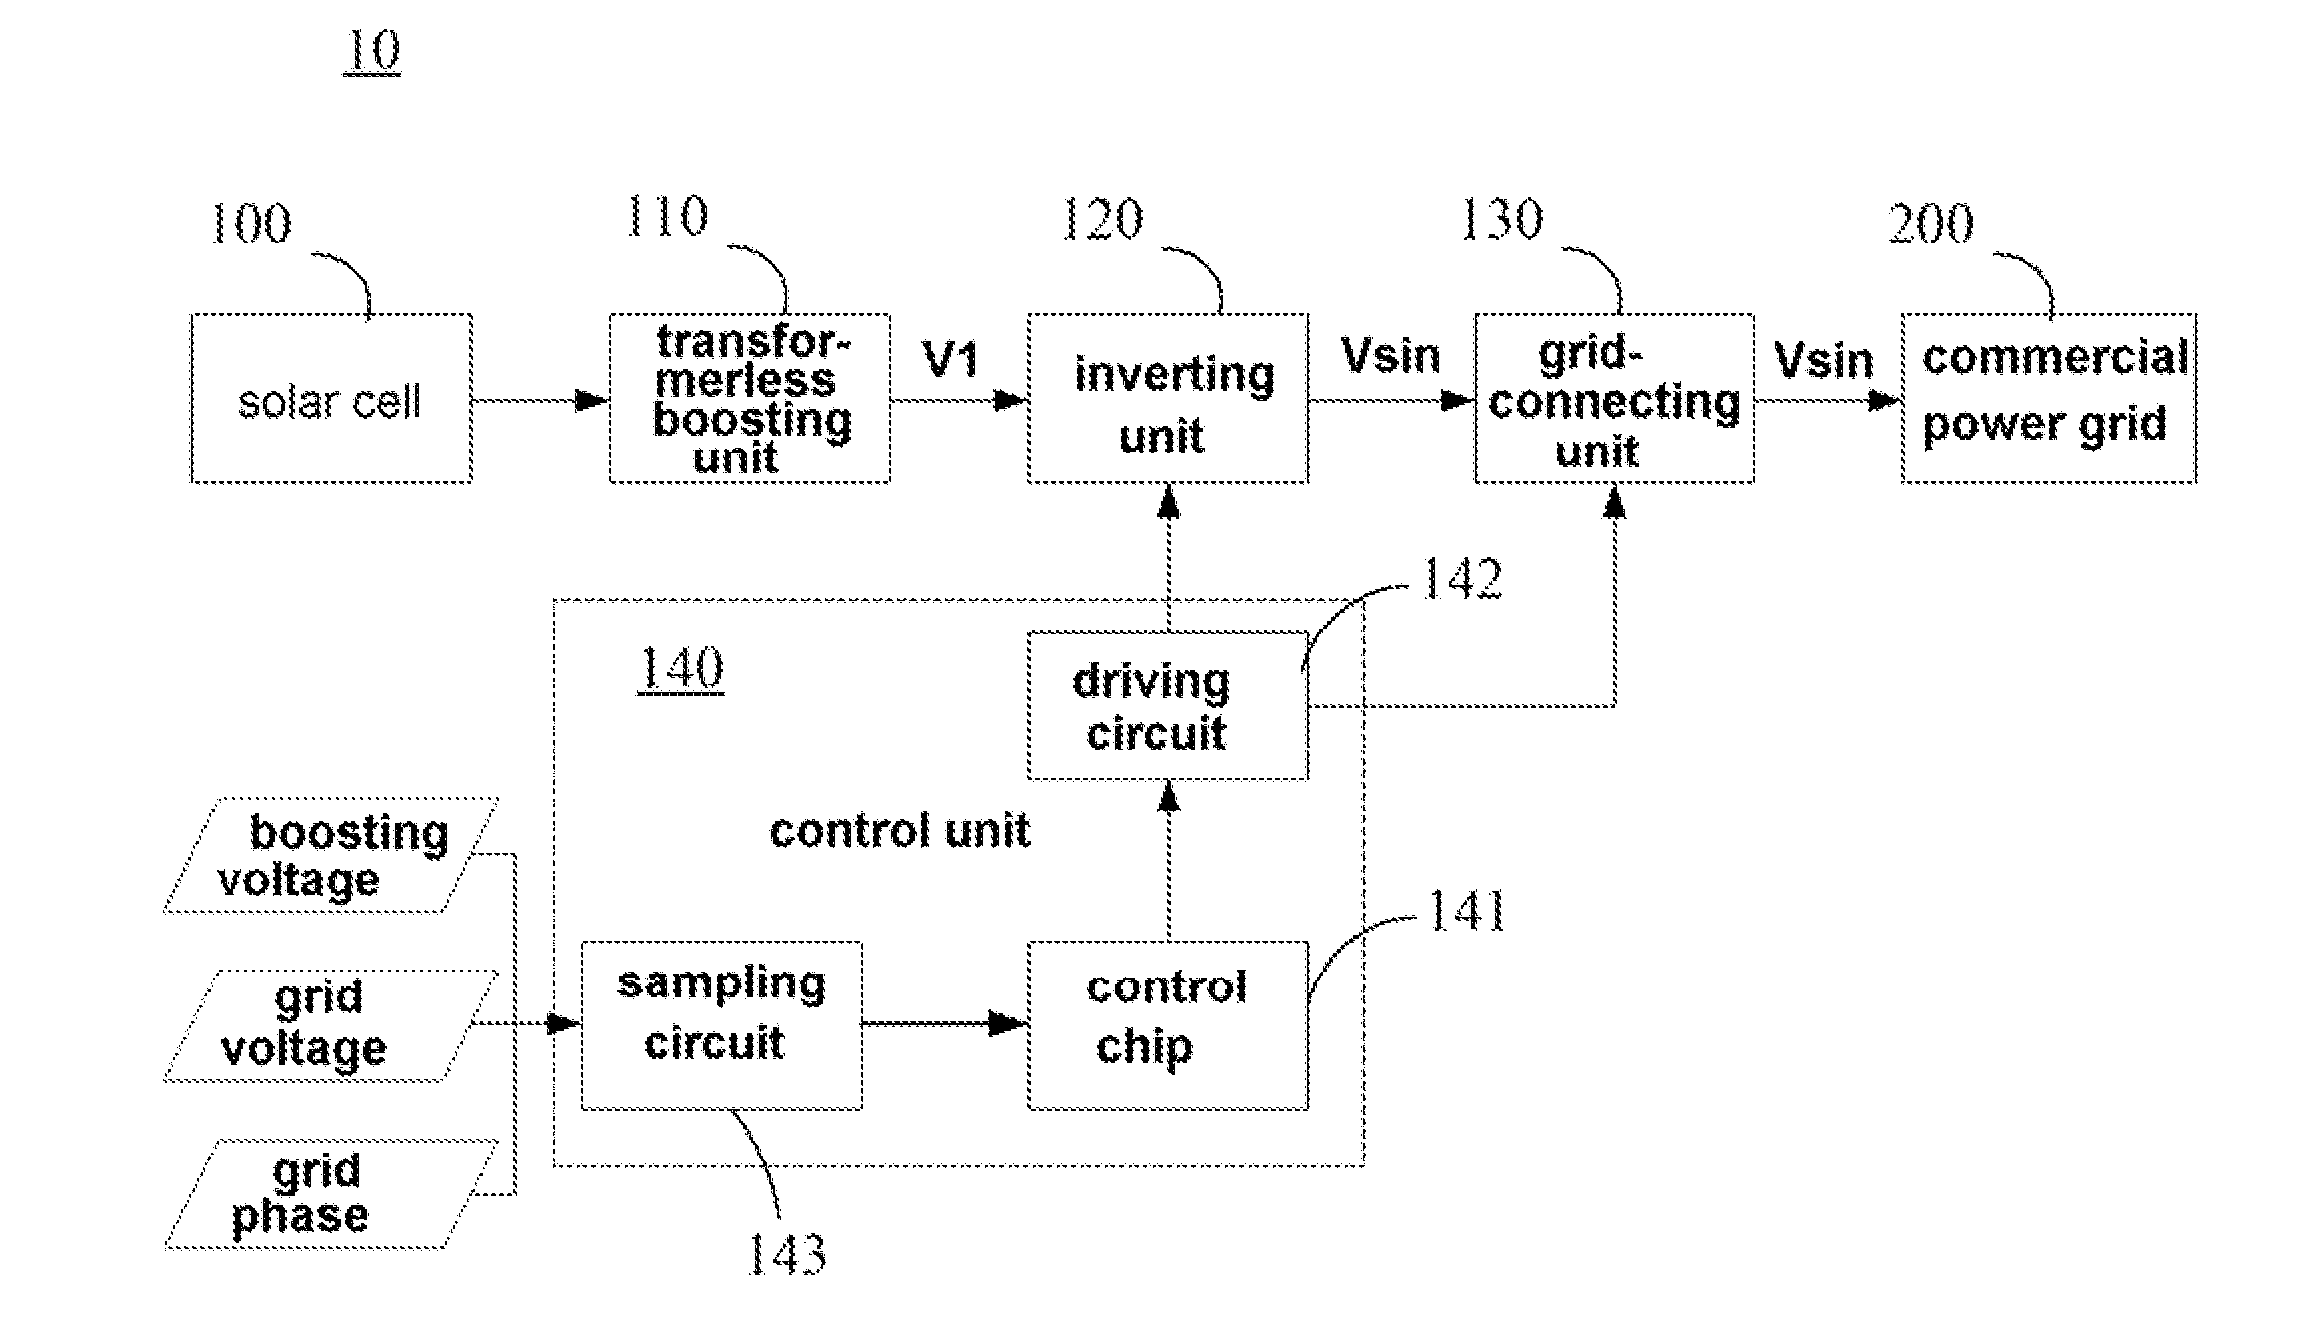 Transformerless photovoltaic grid-connecting inverting device and control method thereof